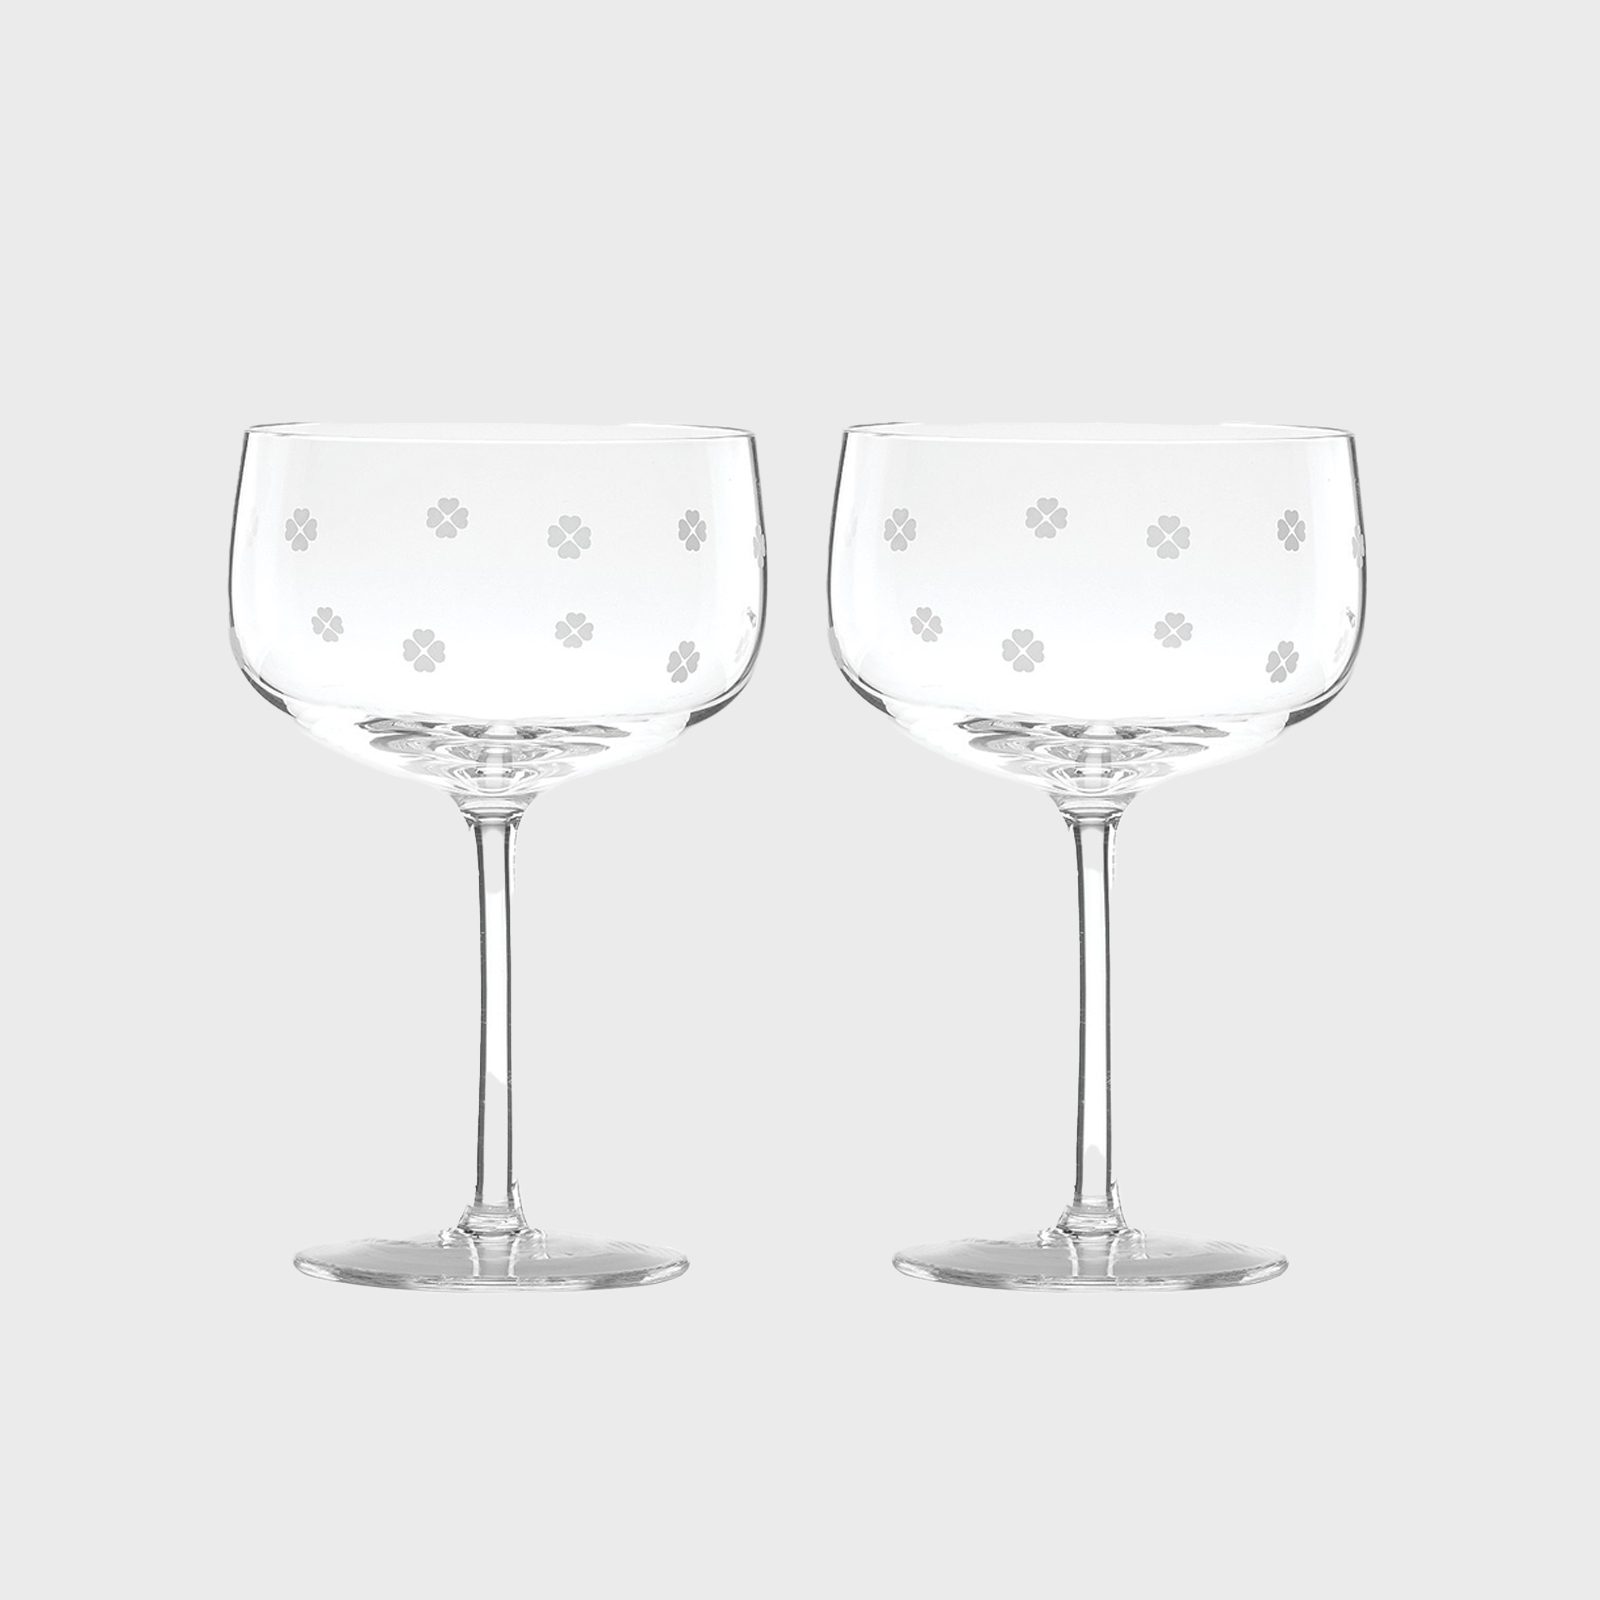 https://www.rd.com/wp-content/uploads/2021/10/Kate-Spade-New-York-Spade-Clover-Champagne-Coupe-Glasses-via-macys.jpg?fit=700%2C700